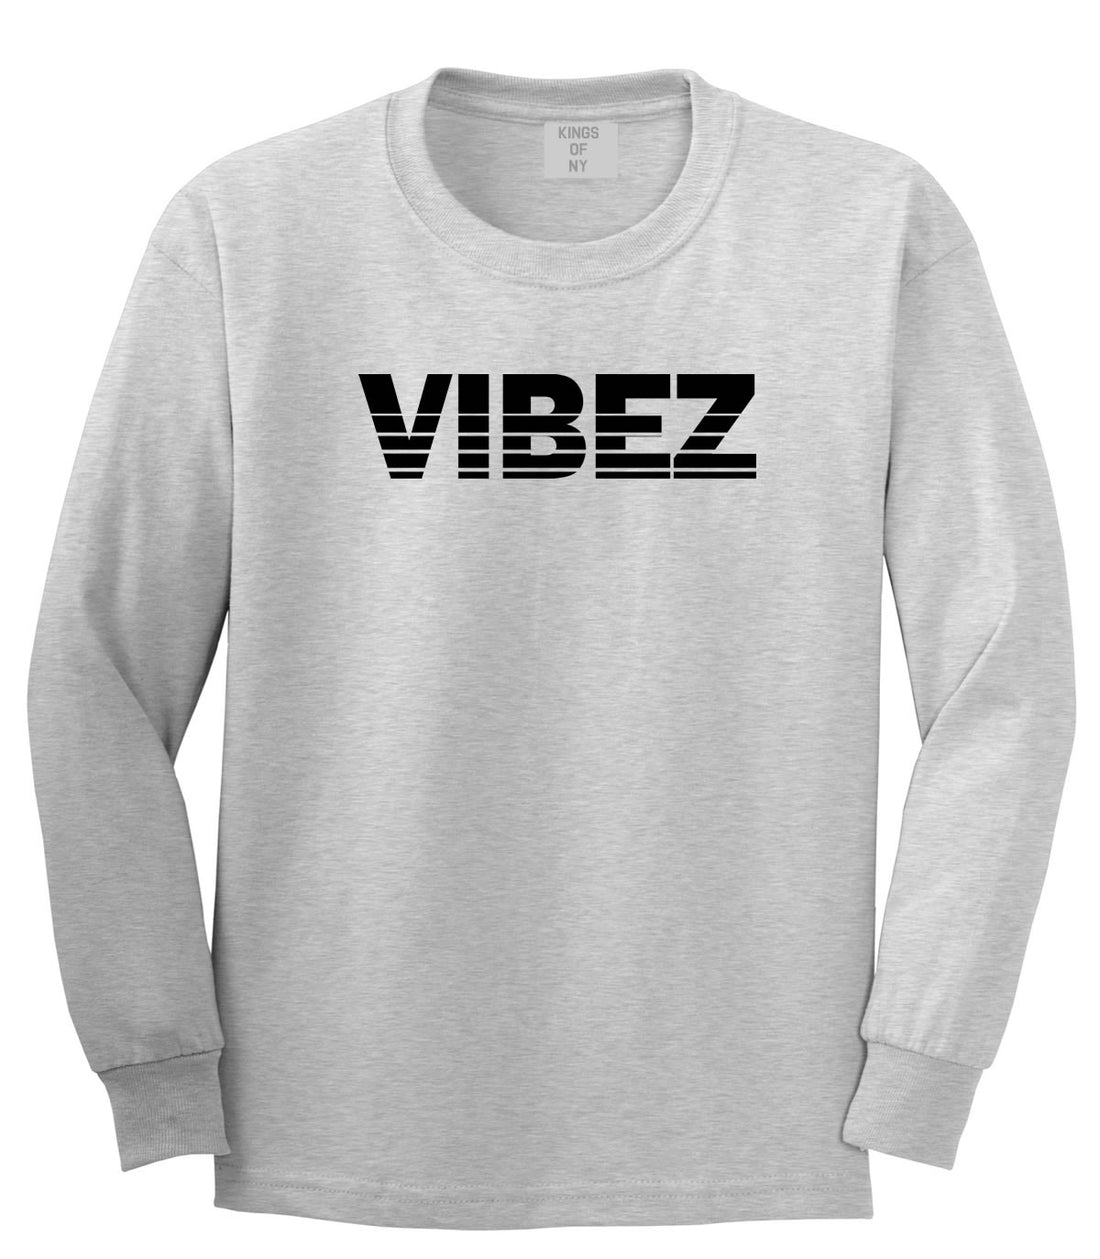 VIBEZ Racing Style Long Sleeve T-Shirt in Grey by Kings Of NY